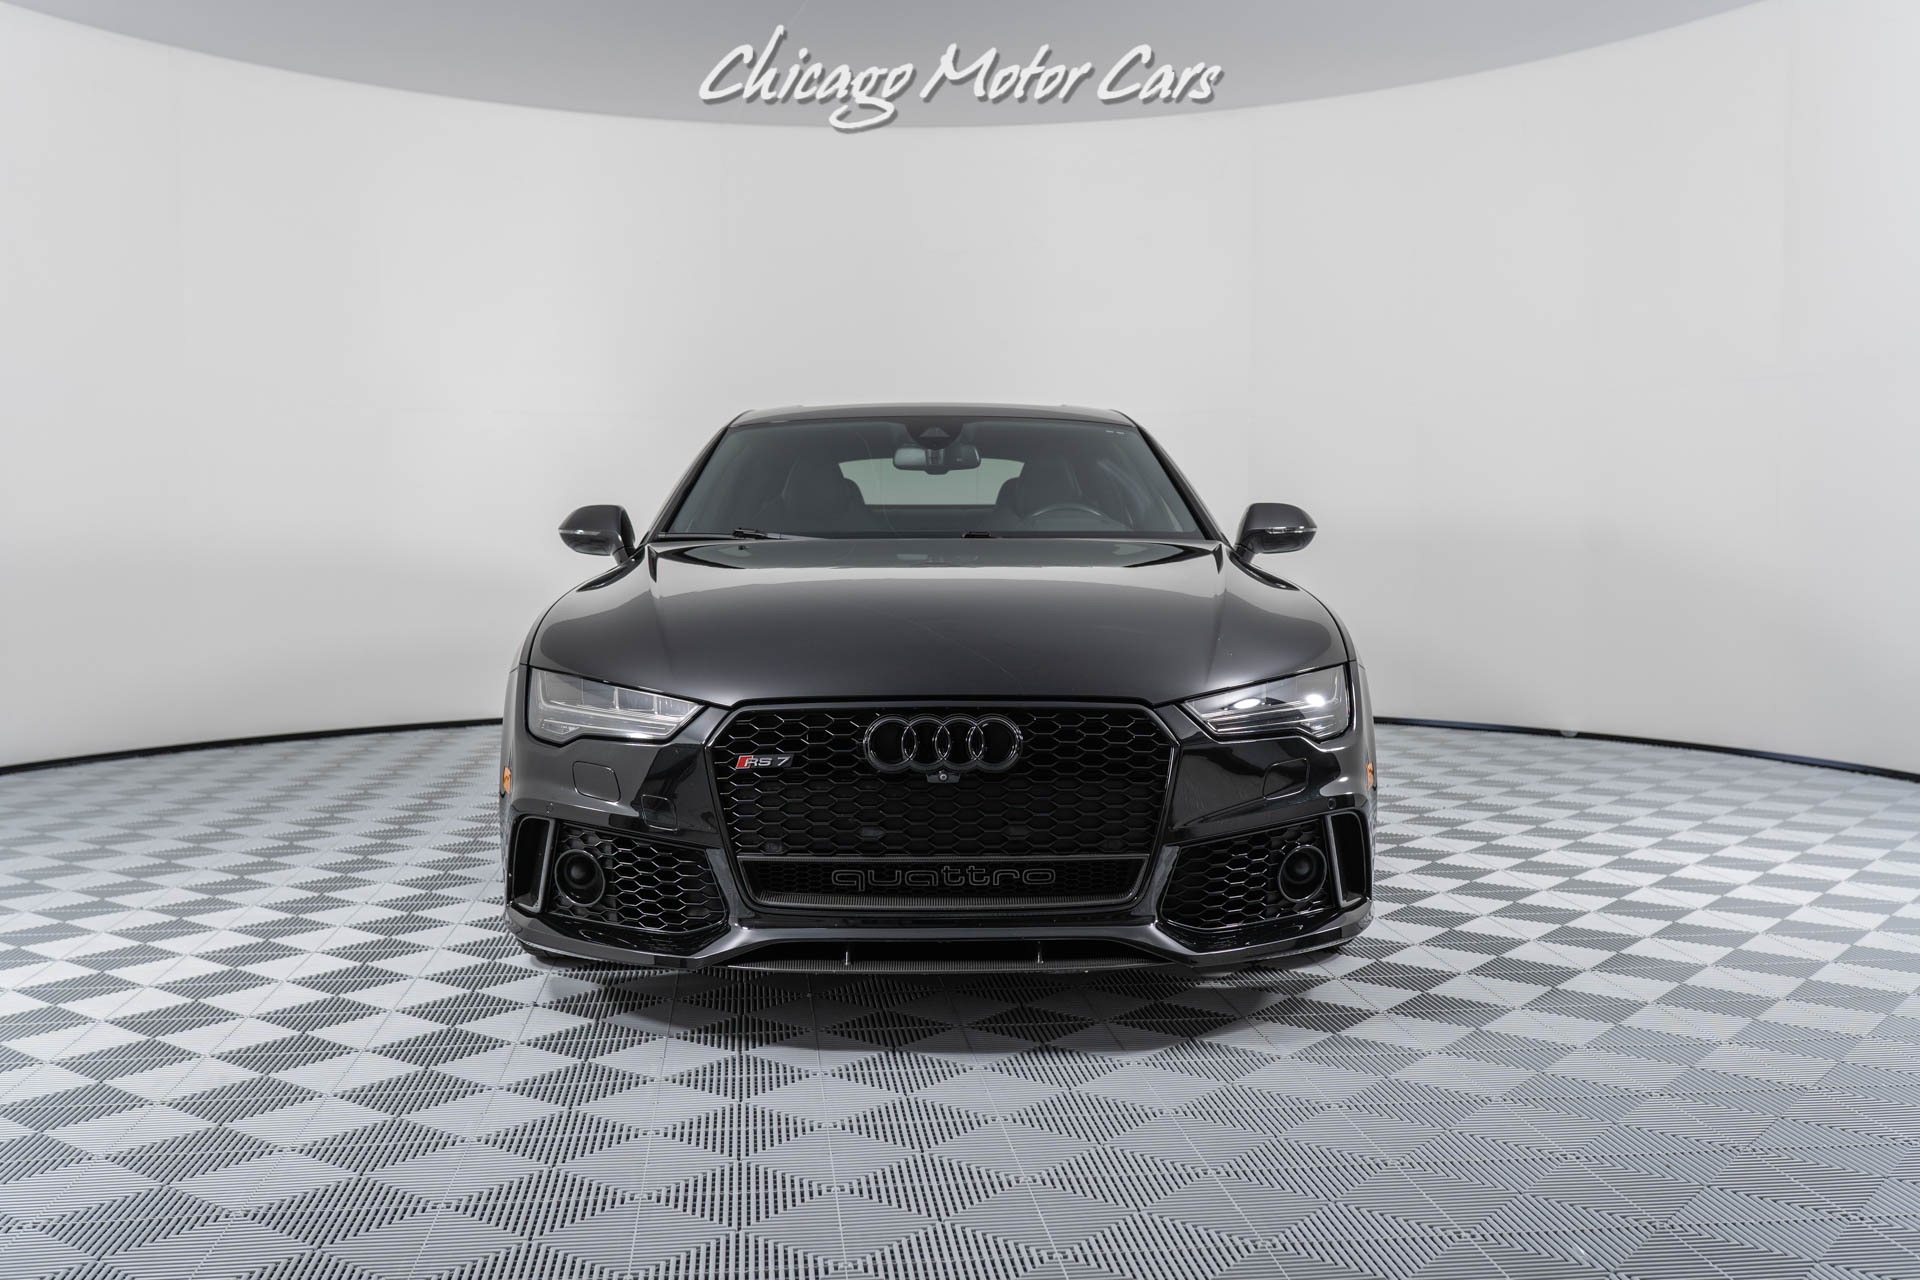 Used-2016-Audi-RS-7-40T-quattro-Upgrades-709HP-APR-Stage-2-Tune-Full-PPF-Carbon-Optic-Package